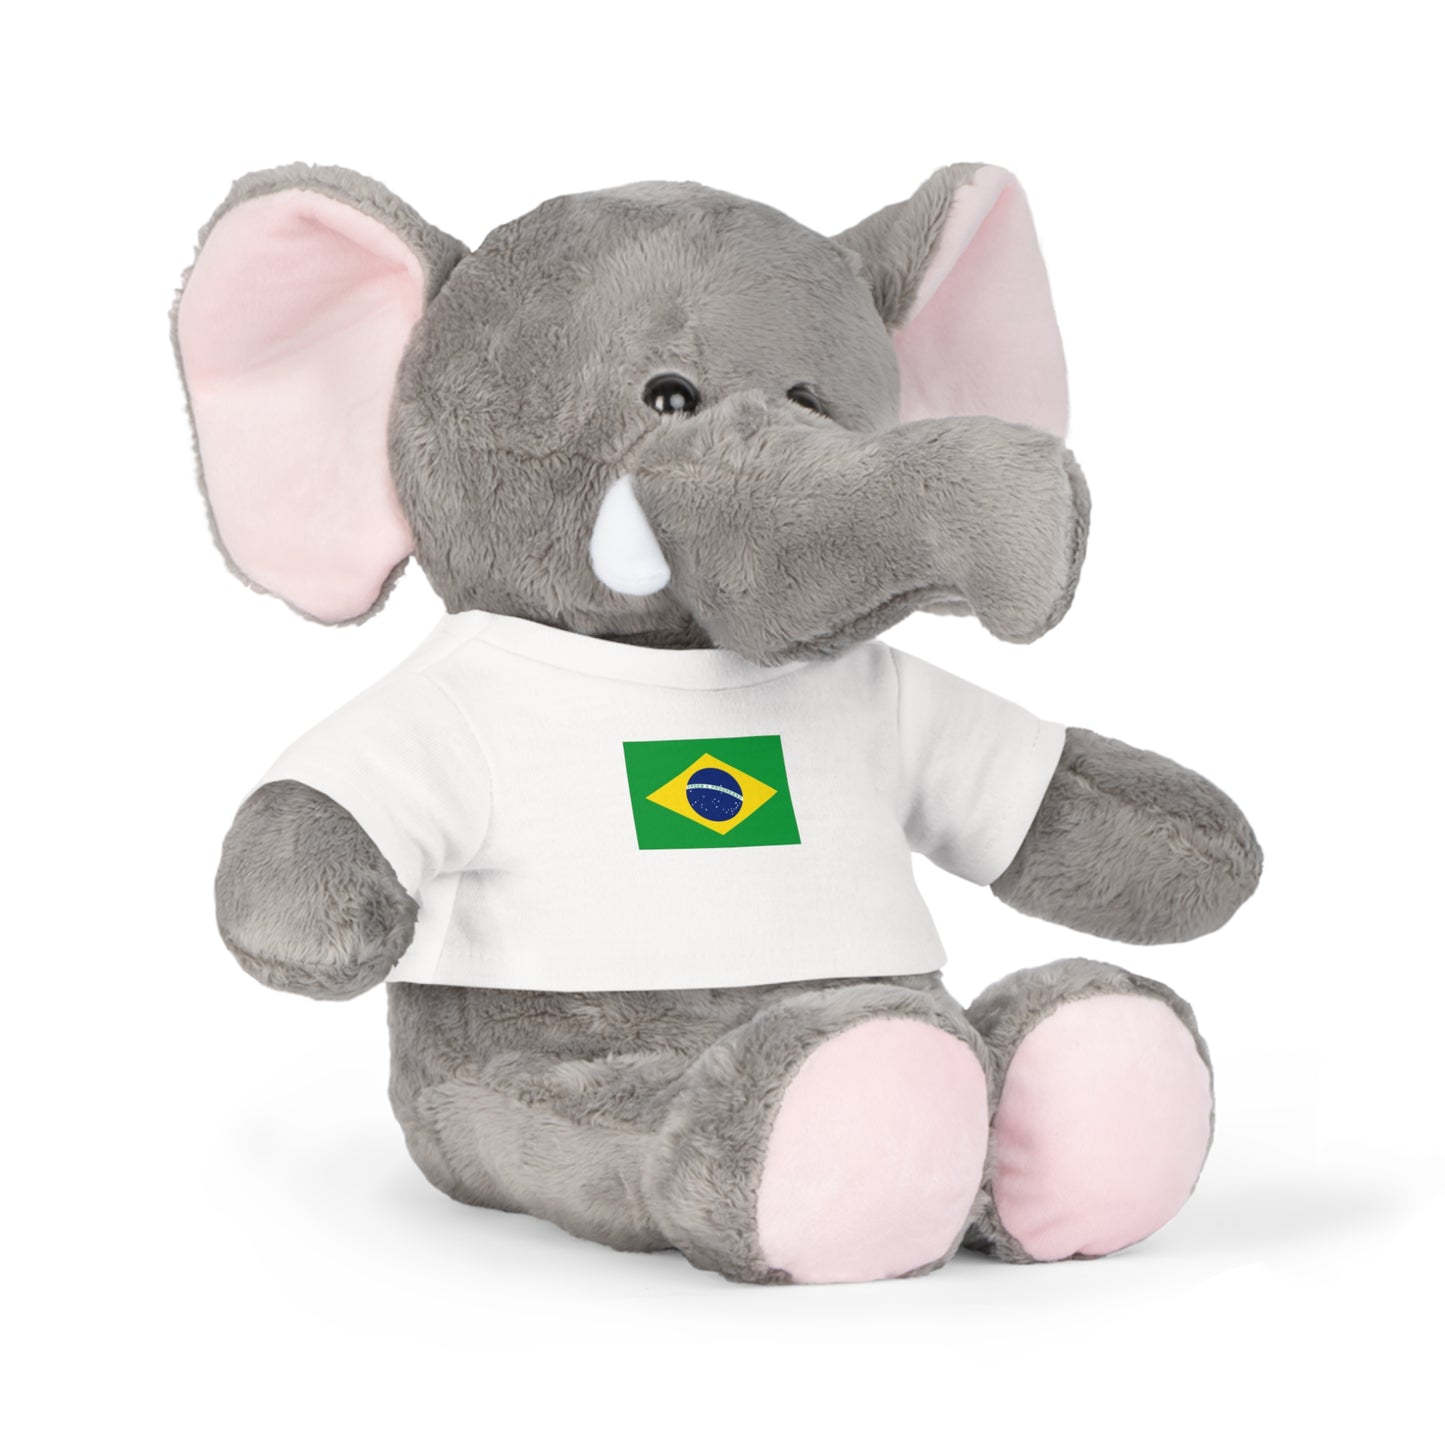 Plush Toy with a Brazil Shirt